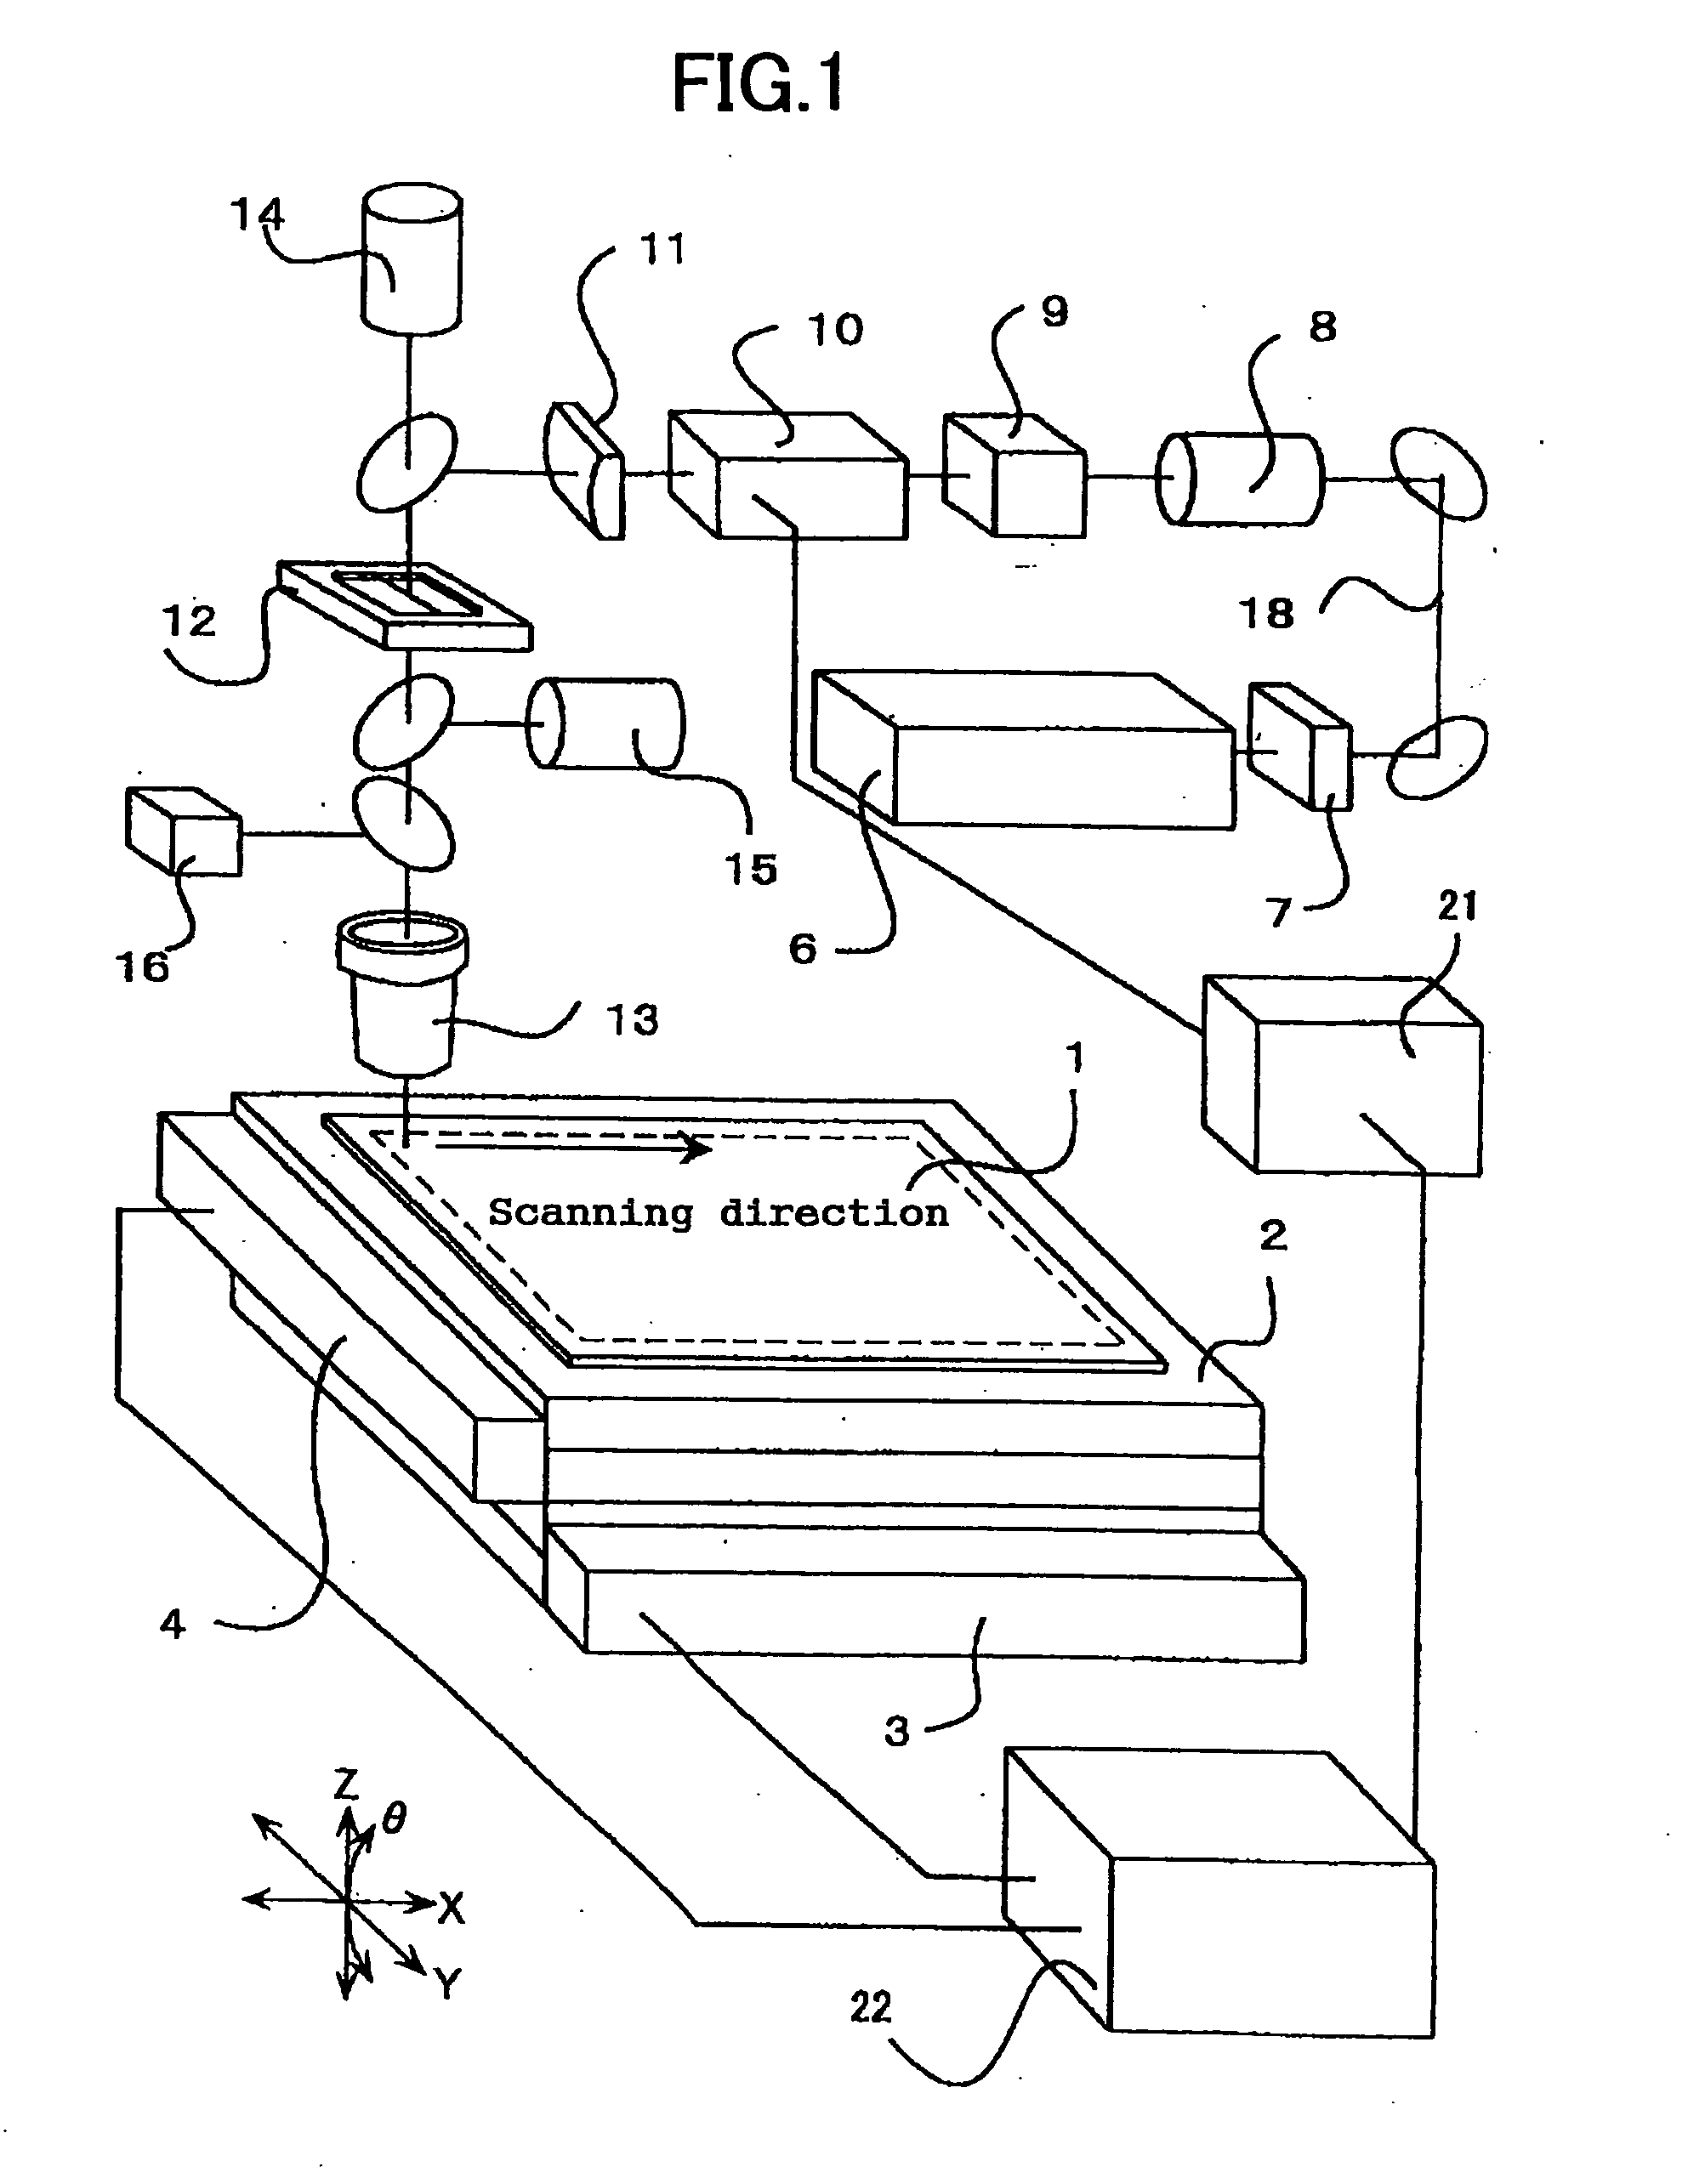 Apparatus for fabricating a display device